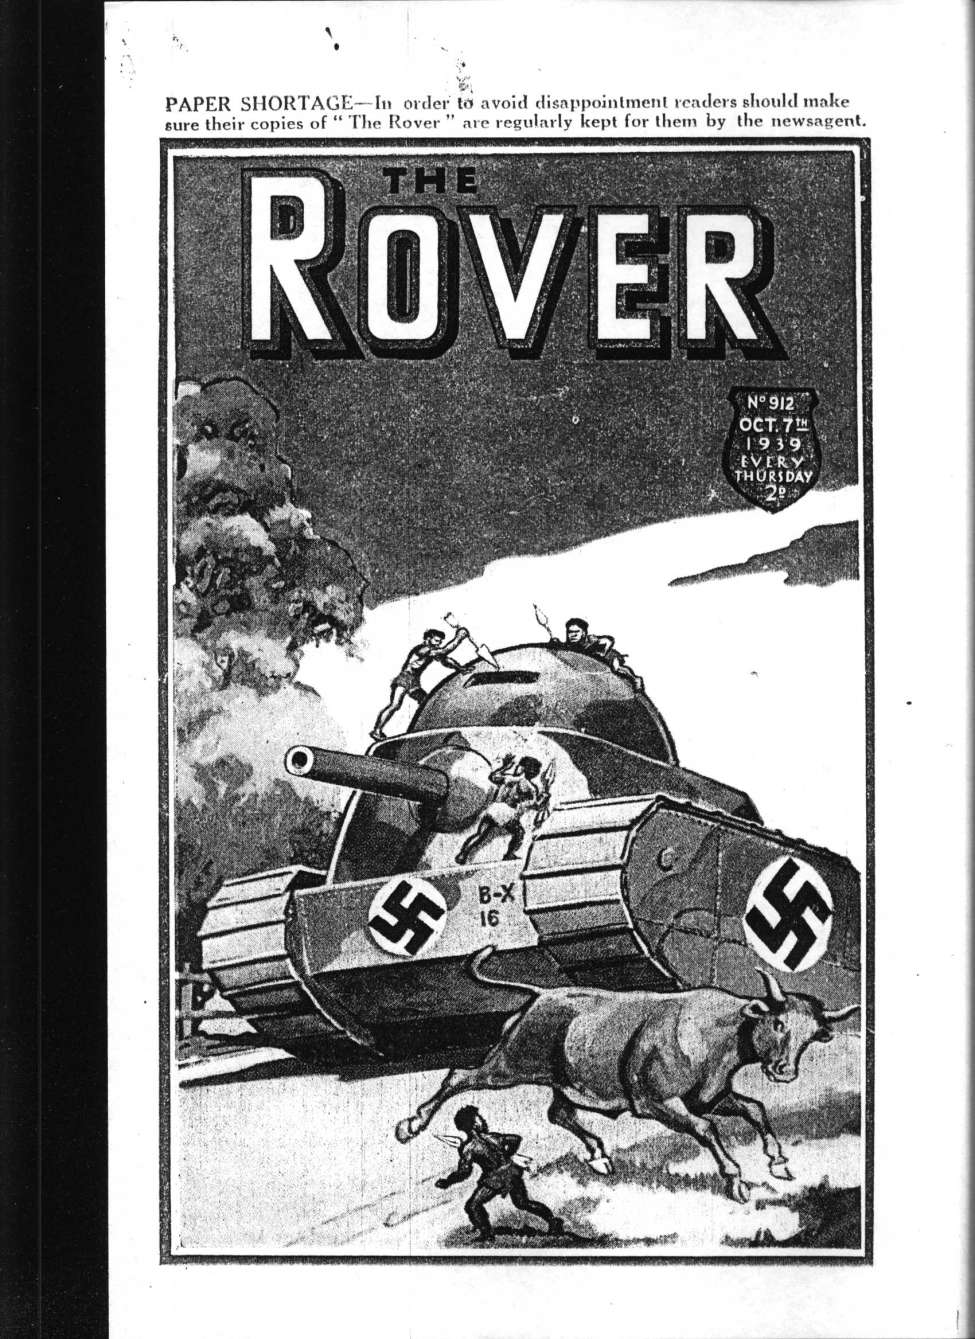 Book Cover For The Rover 912